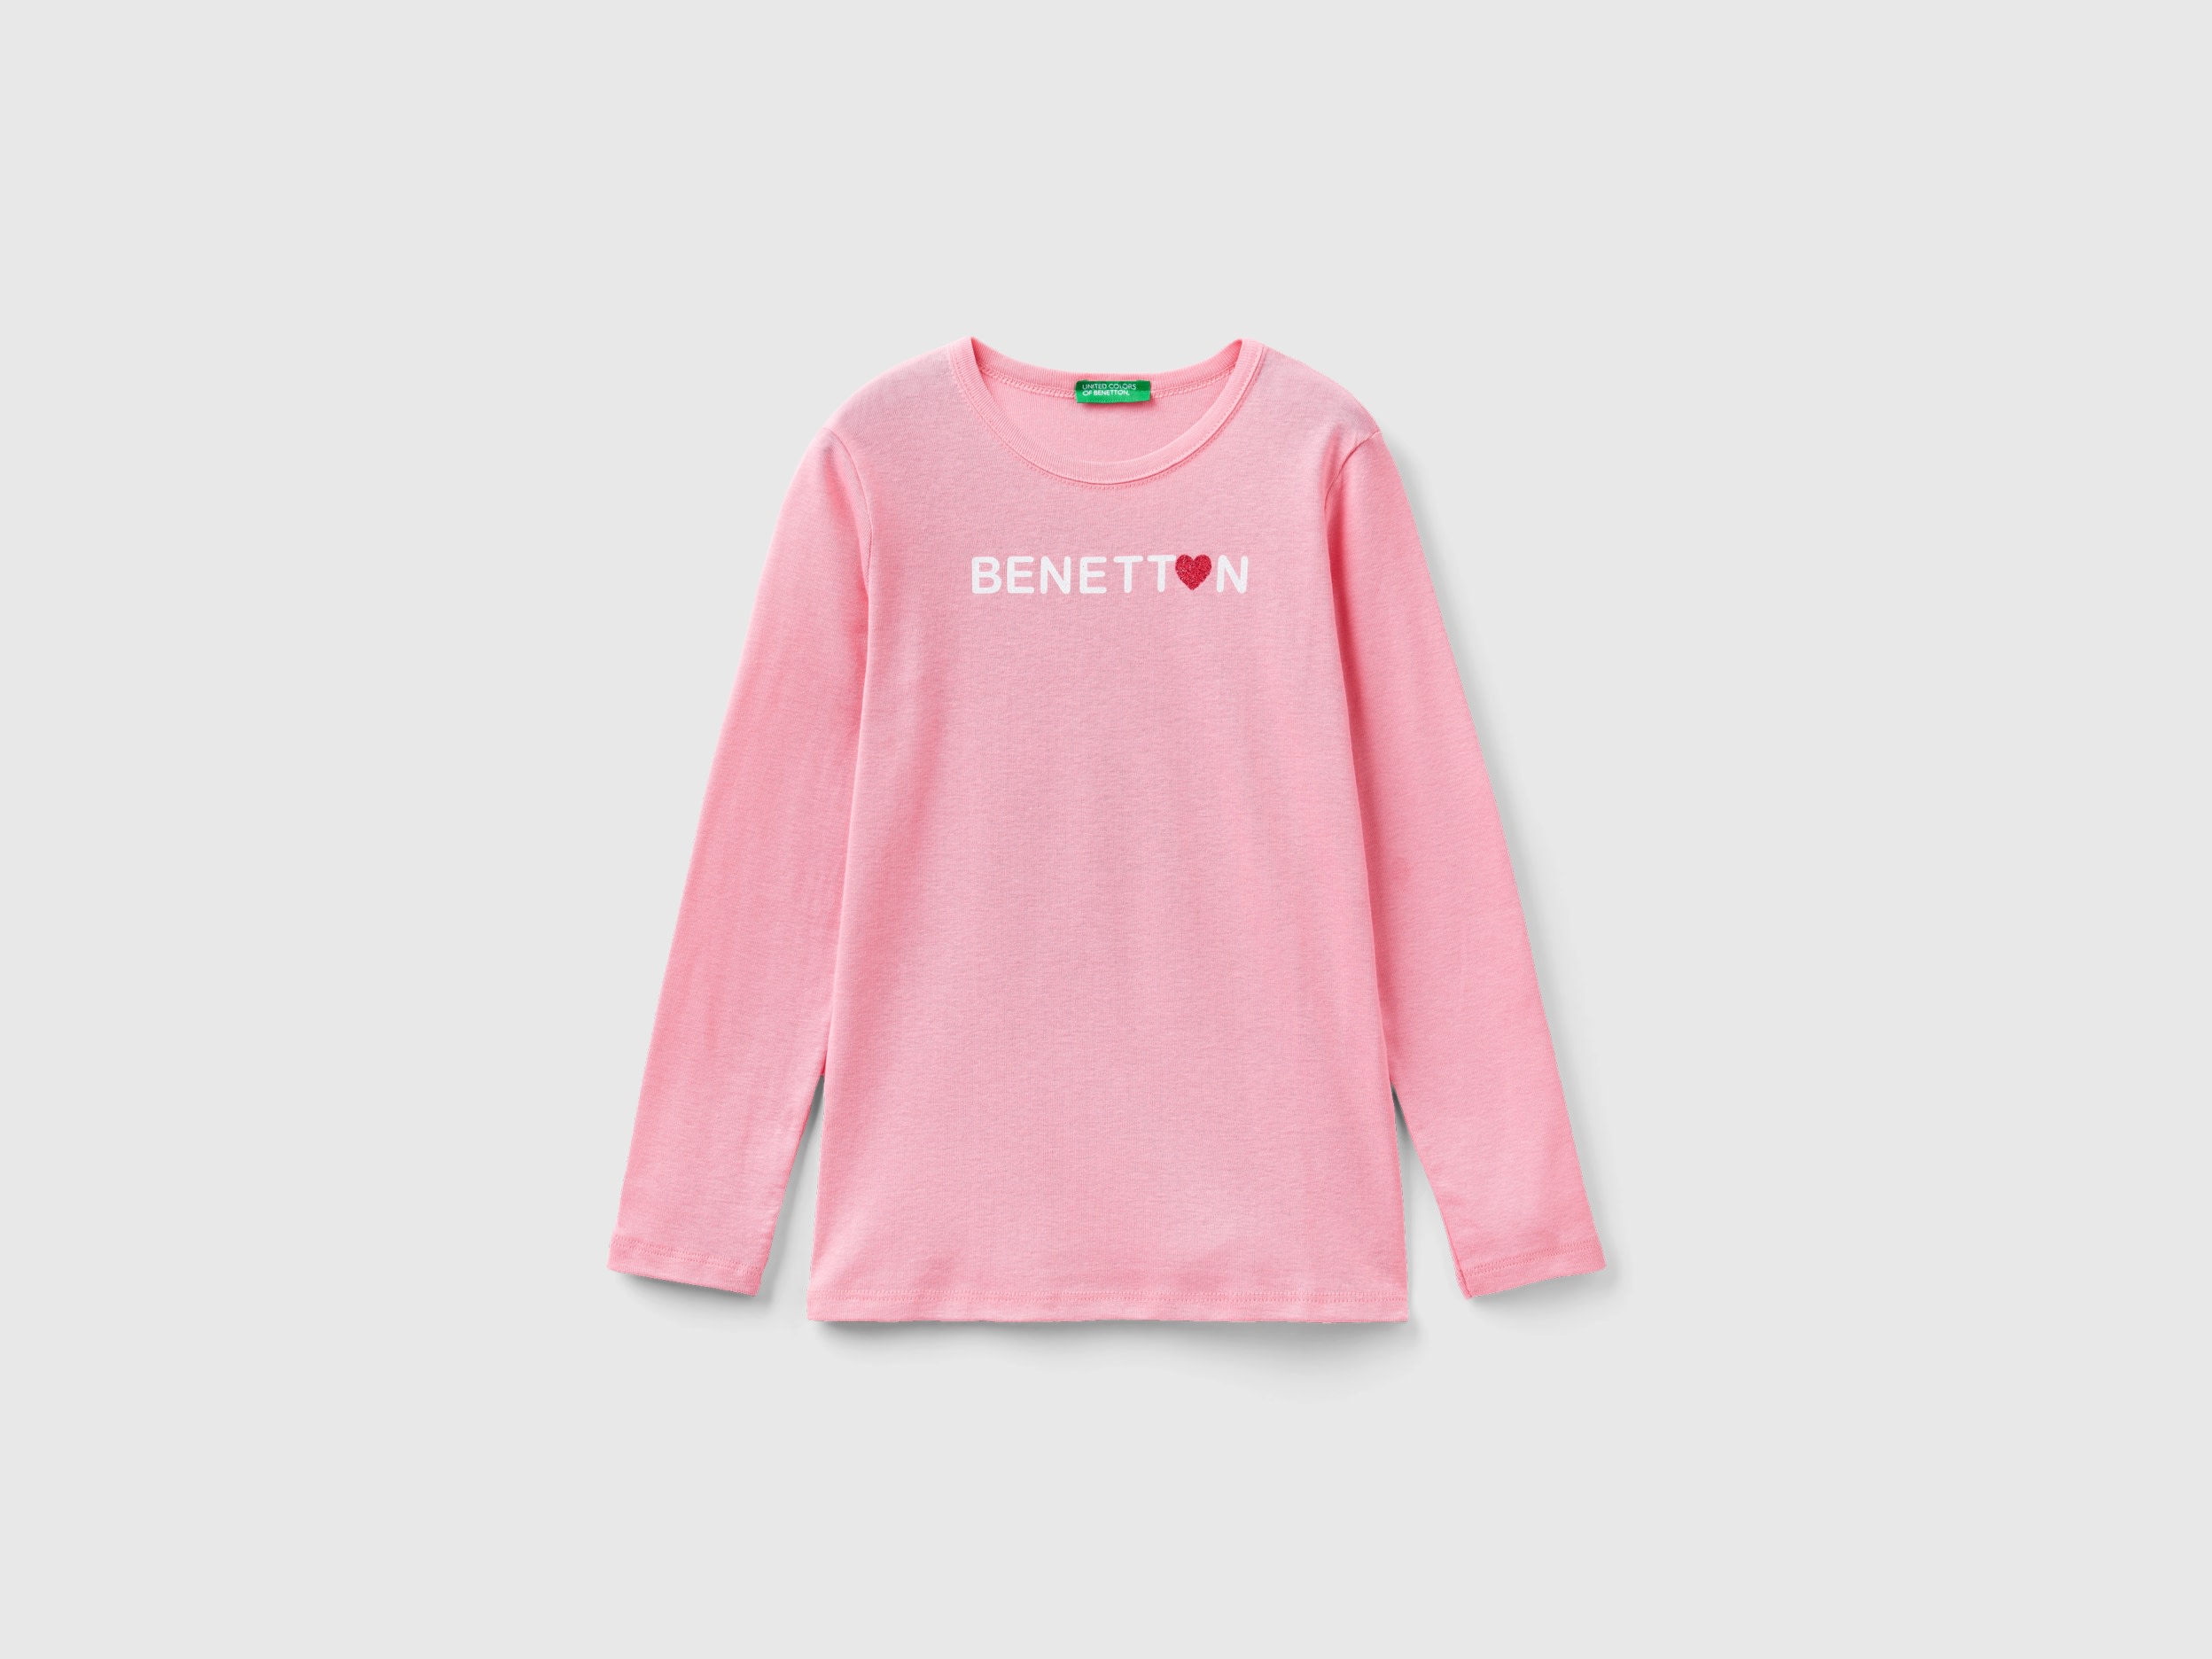 Image of Benetton, Long Sleeve T-shirt With Glitter Print, size S, Pink, Kids